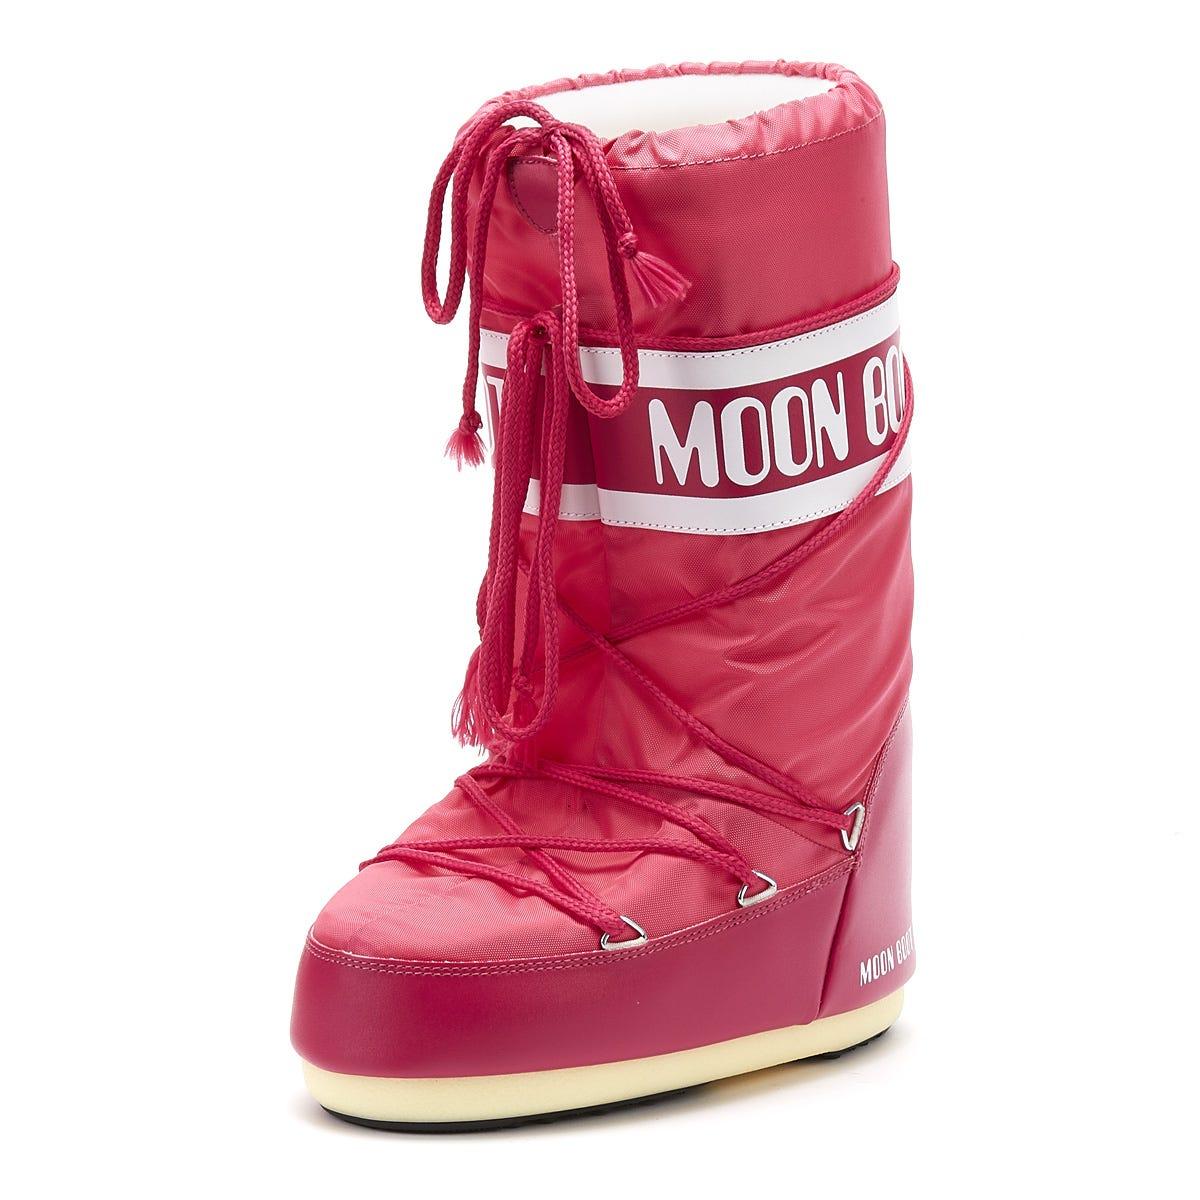 Buy moon boots pink cheap online